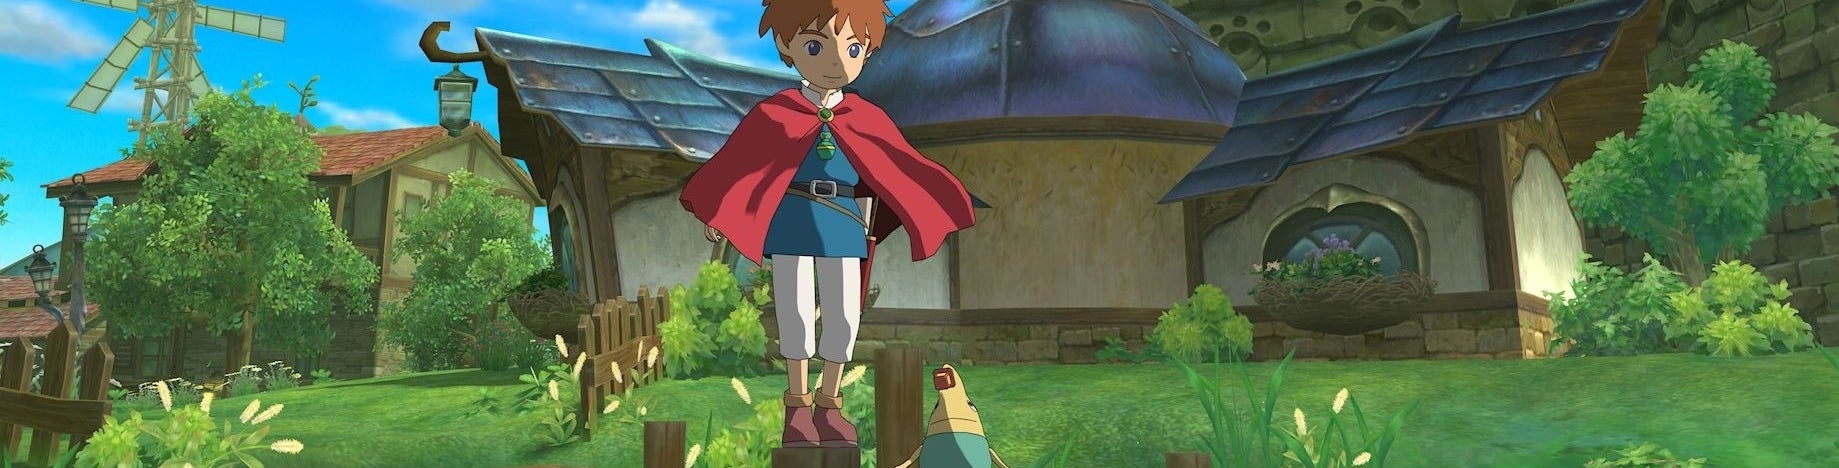 Image for Games of 2013: Ni no Kuni: Wrath of the White Witch